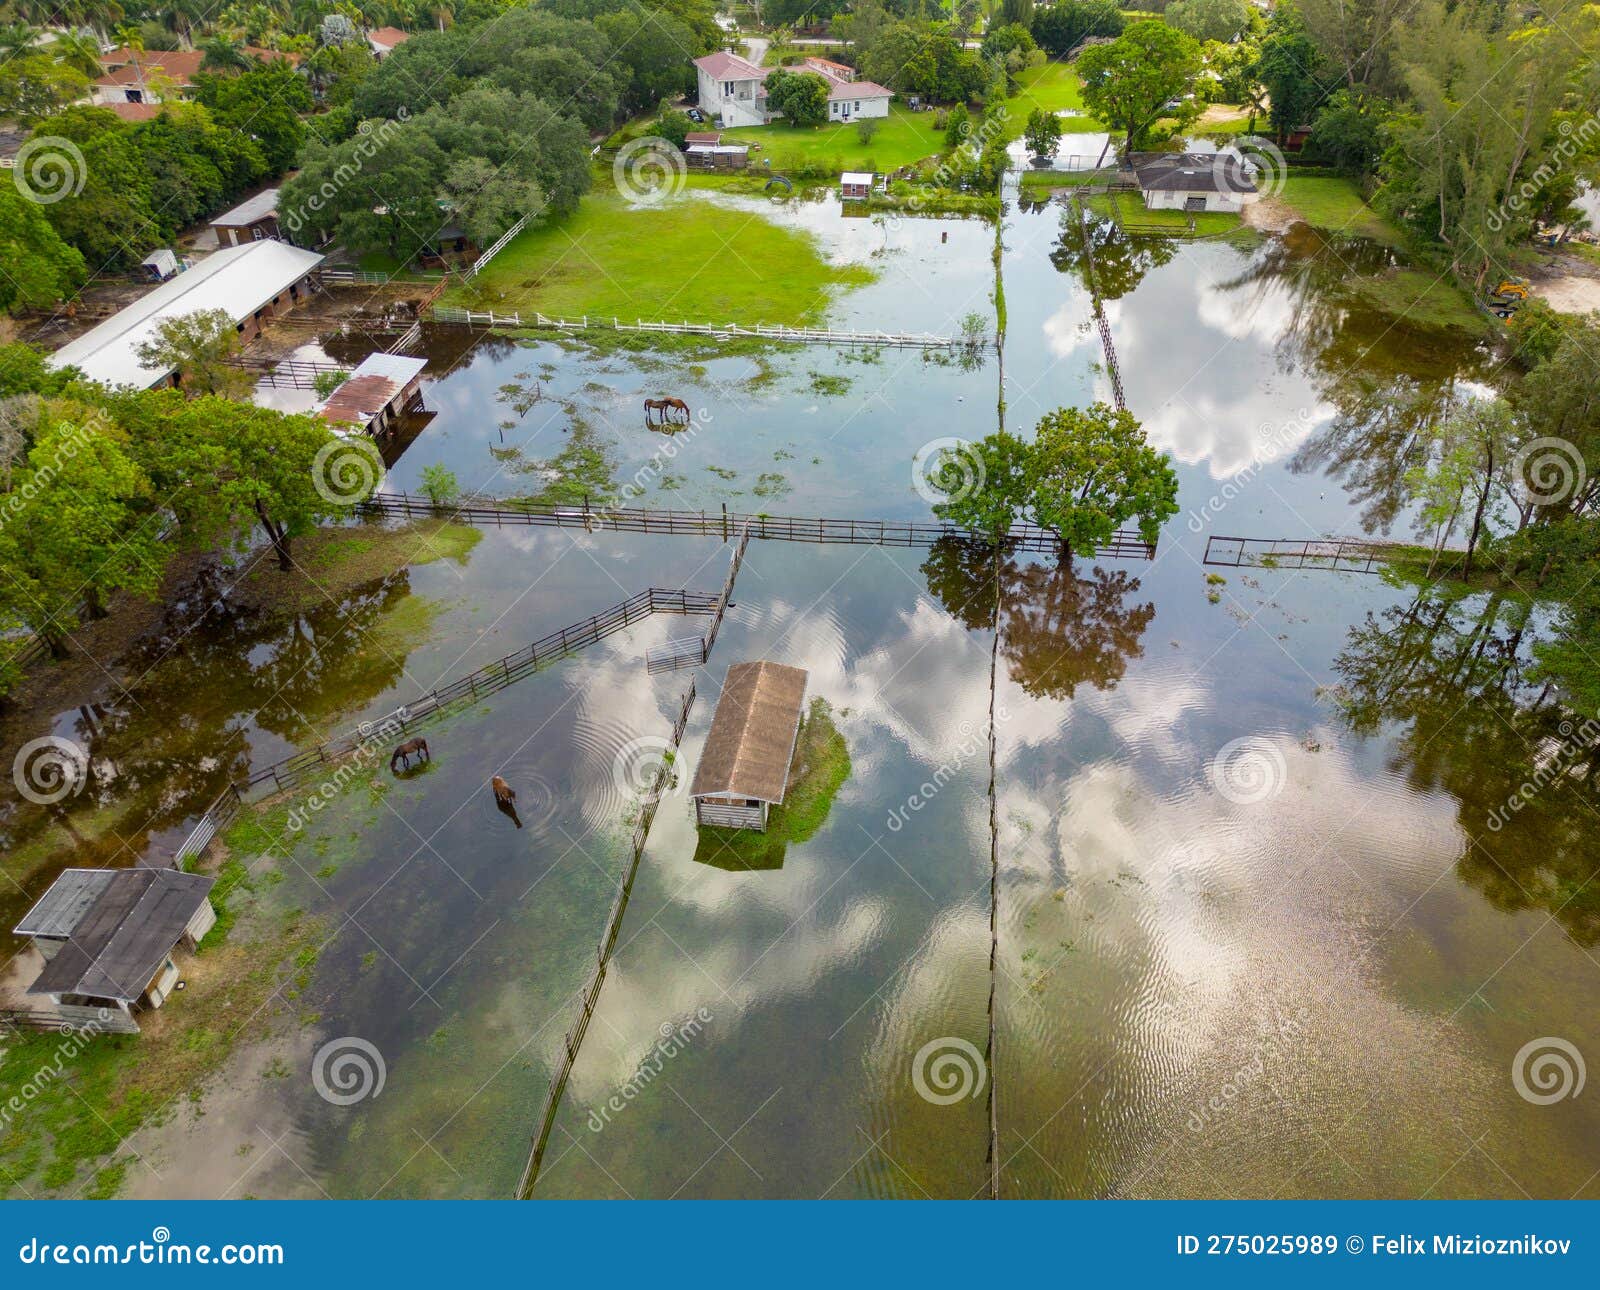 horse ranch farms flooded in southwest ranches fl usa after many days of heavy rain storms